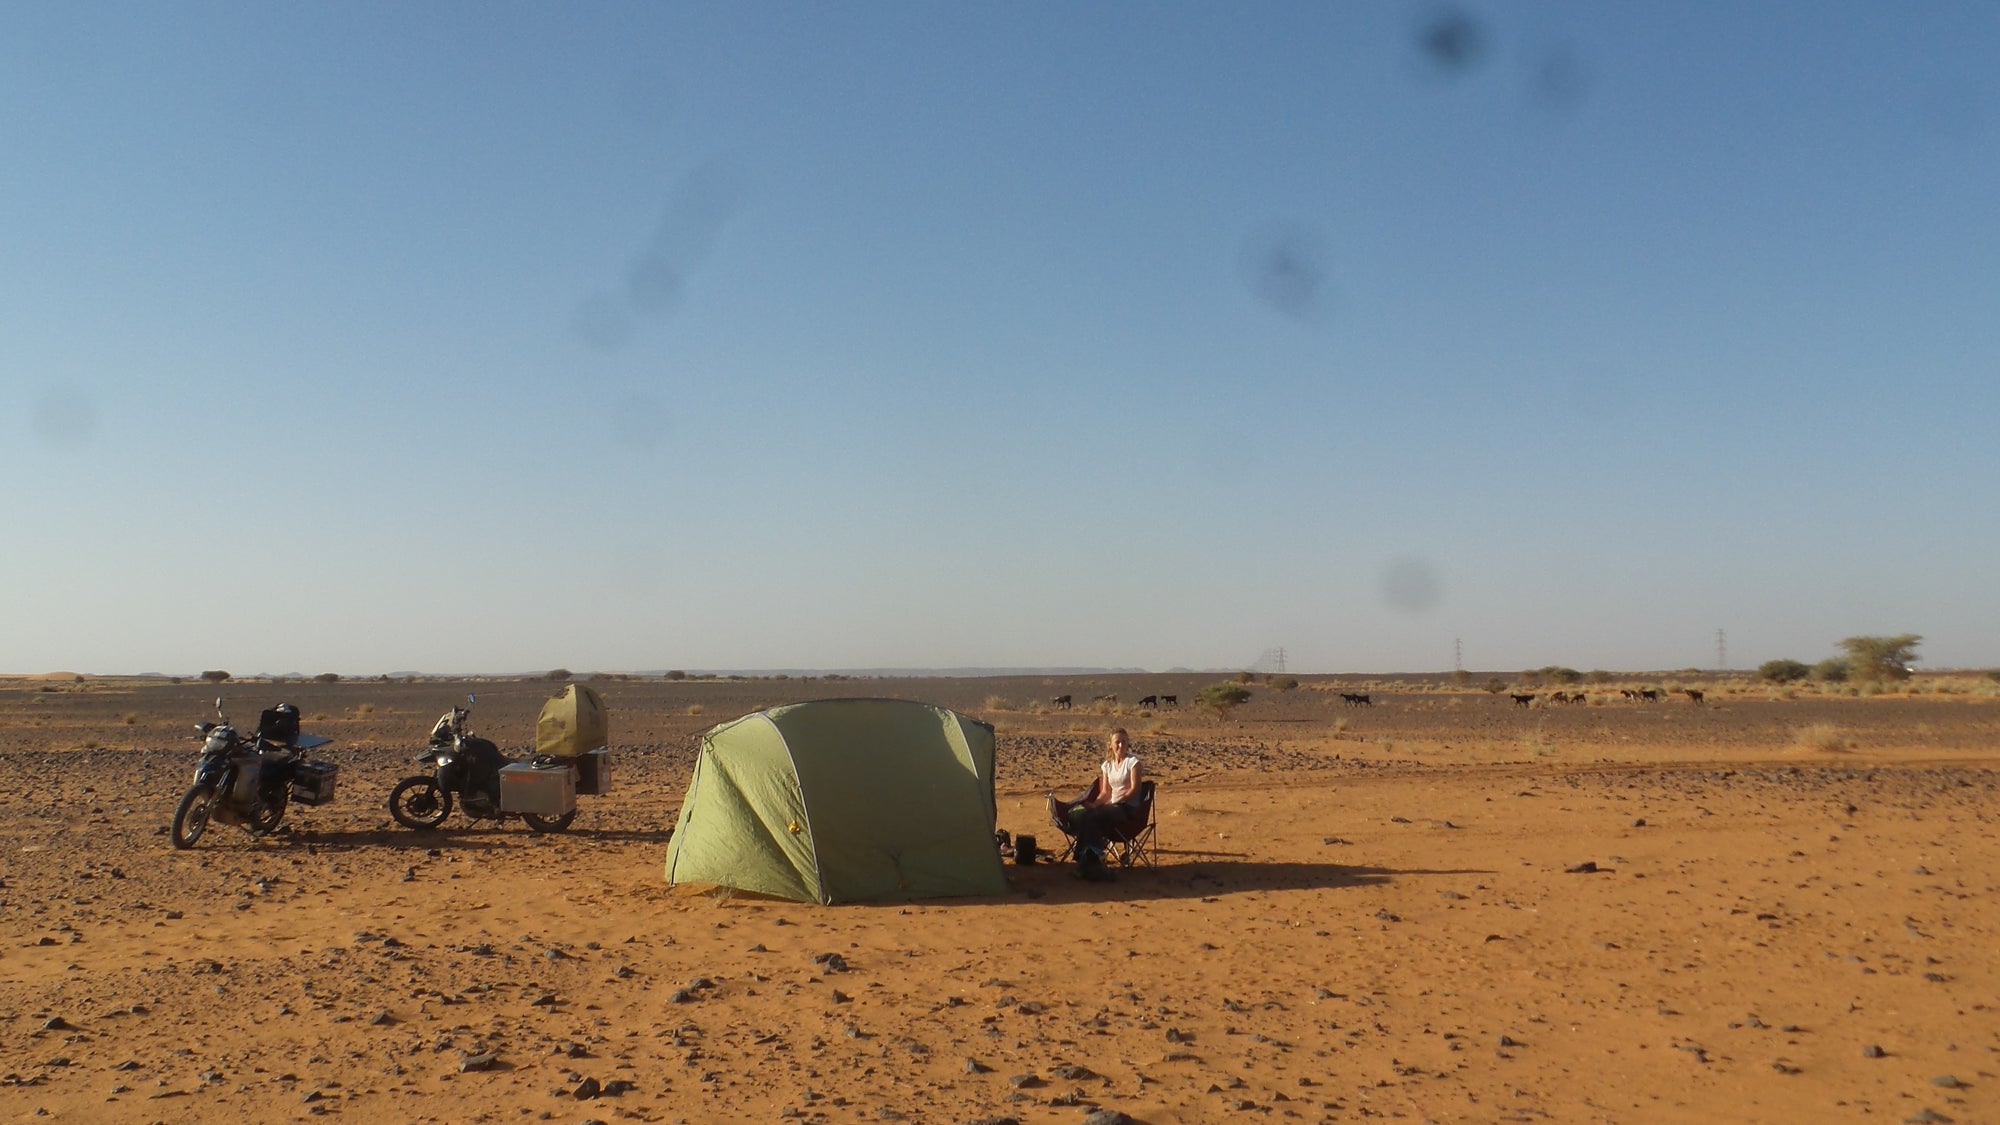 The Pack Track wild camping in the Saharan desert in Sudan away from the highway.